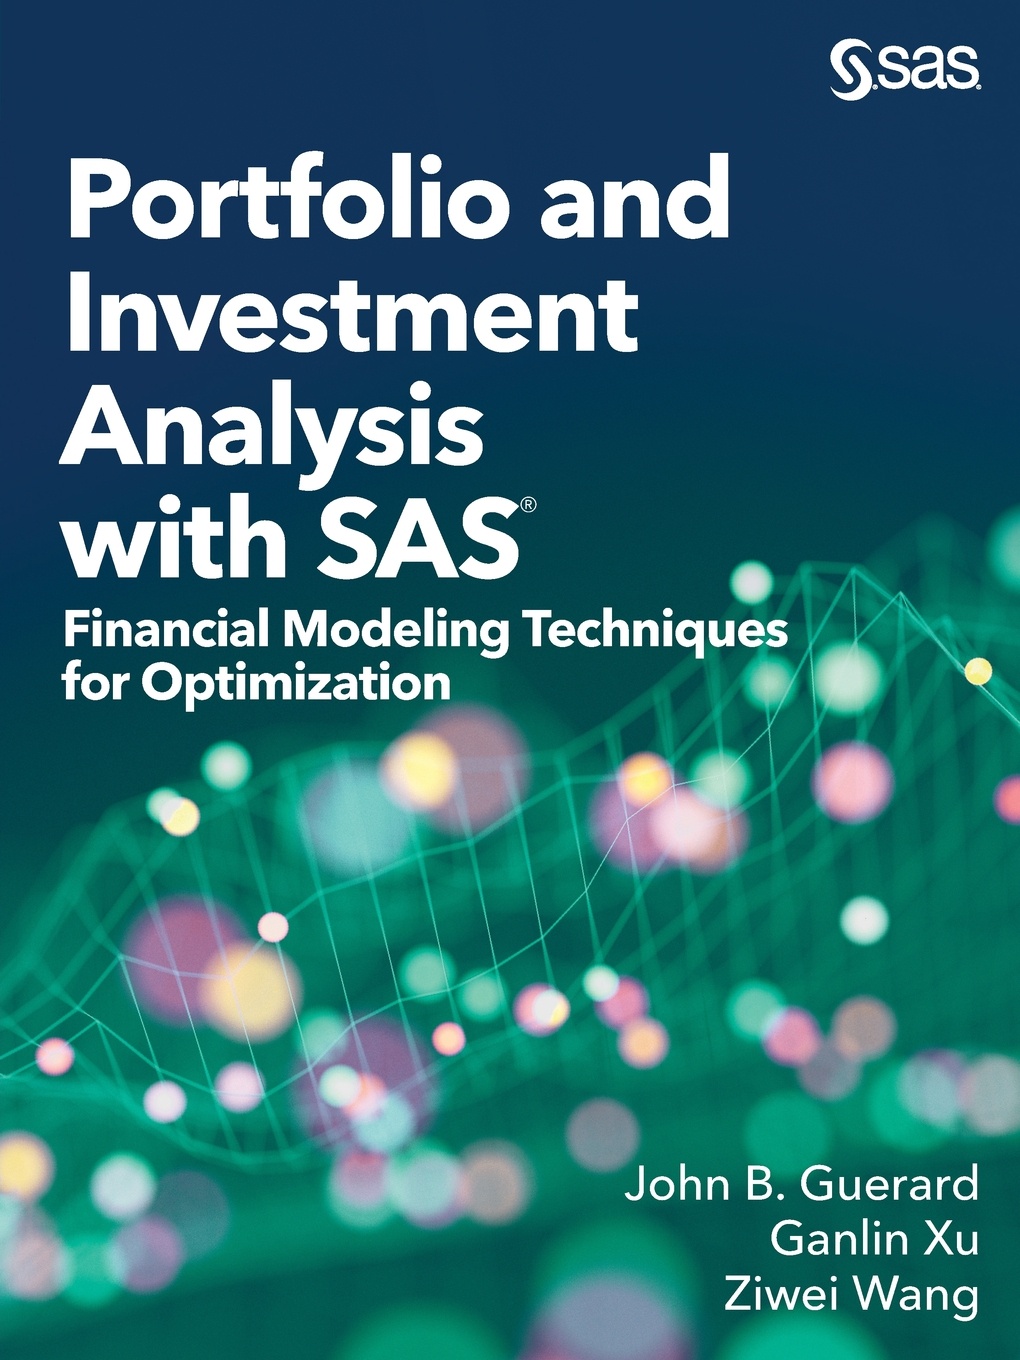 Portfolio and Investment Analysis with SAS. Financial Modeling Techniques for Optimization